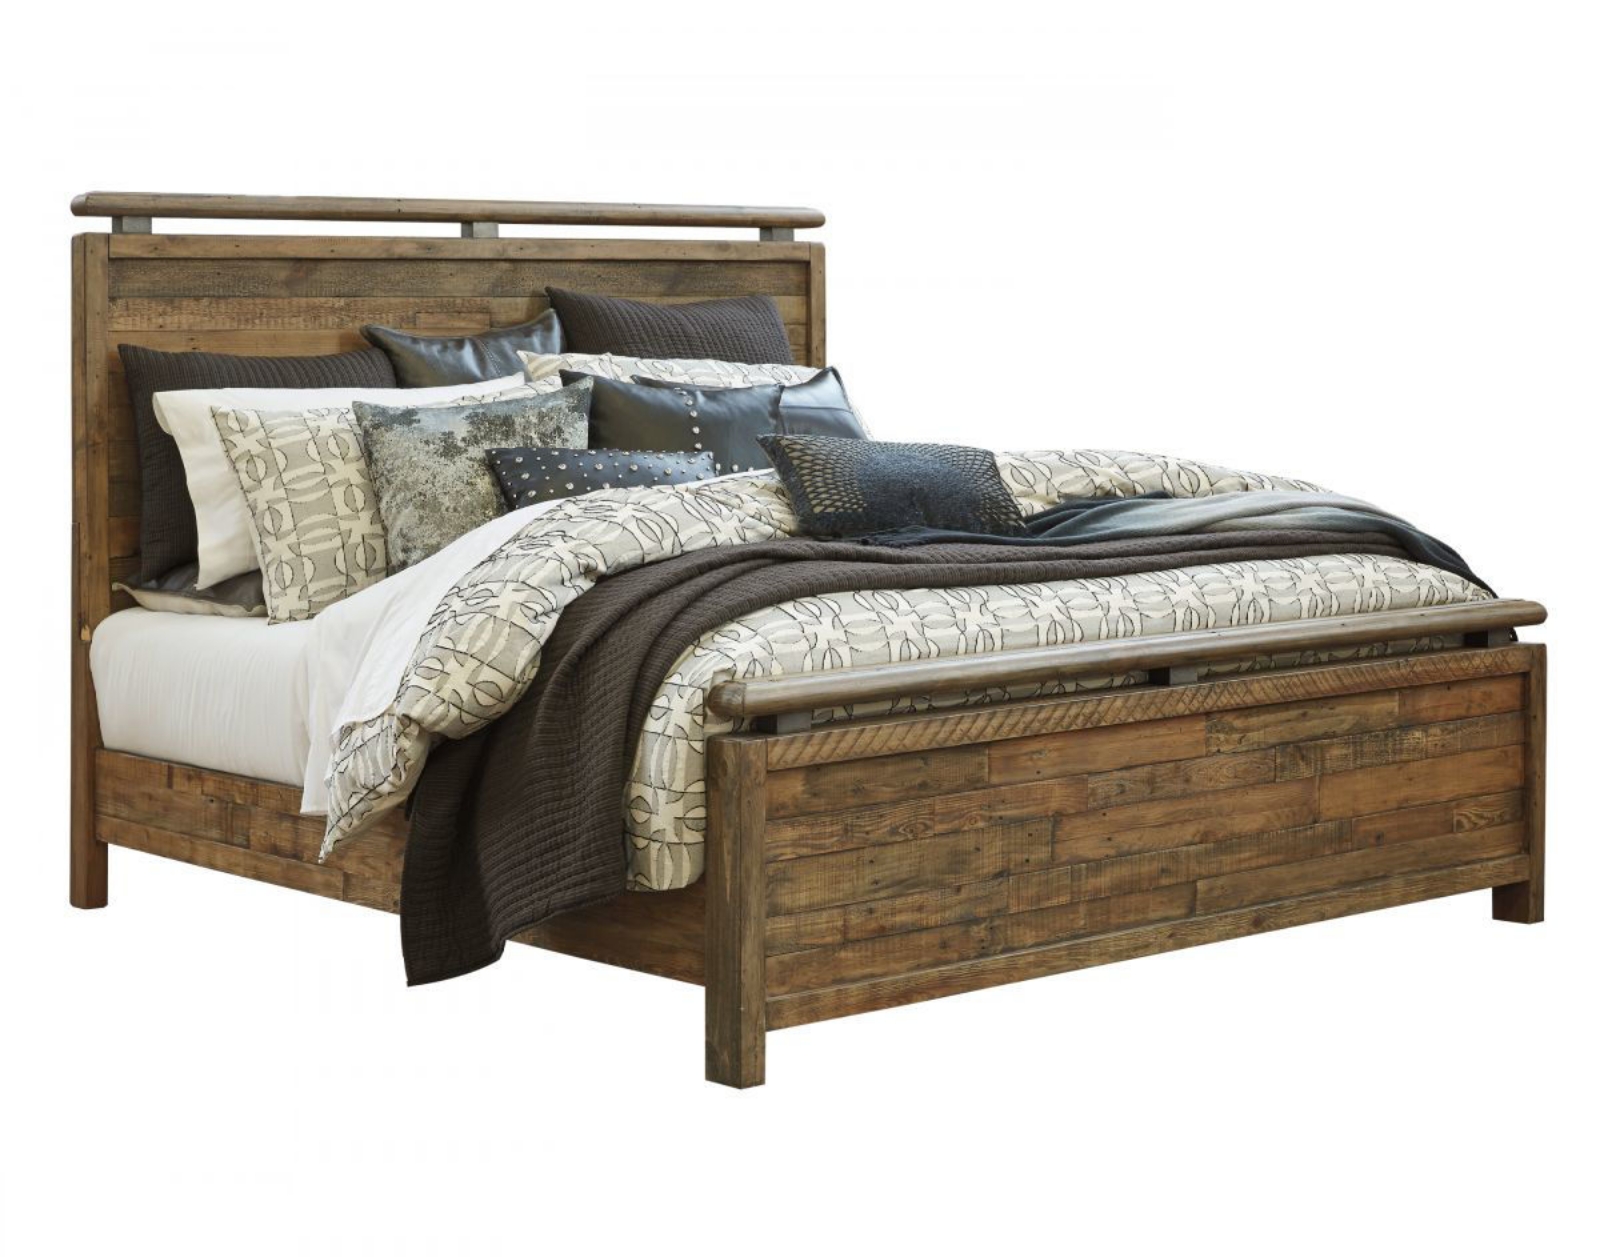 Picture of Sommerford Queen Size Bed